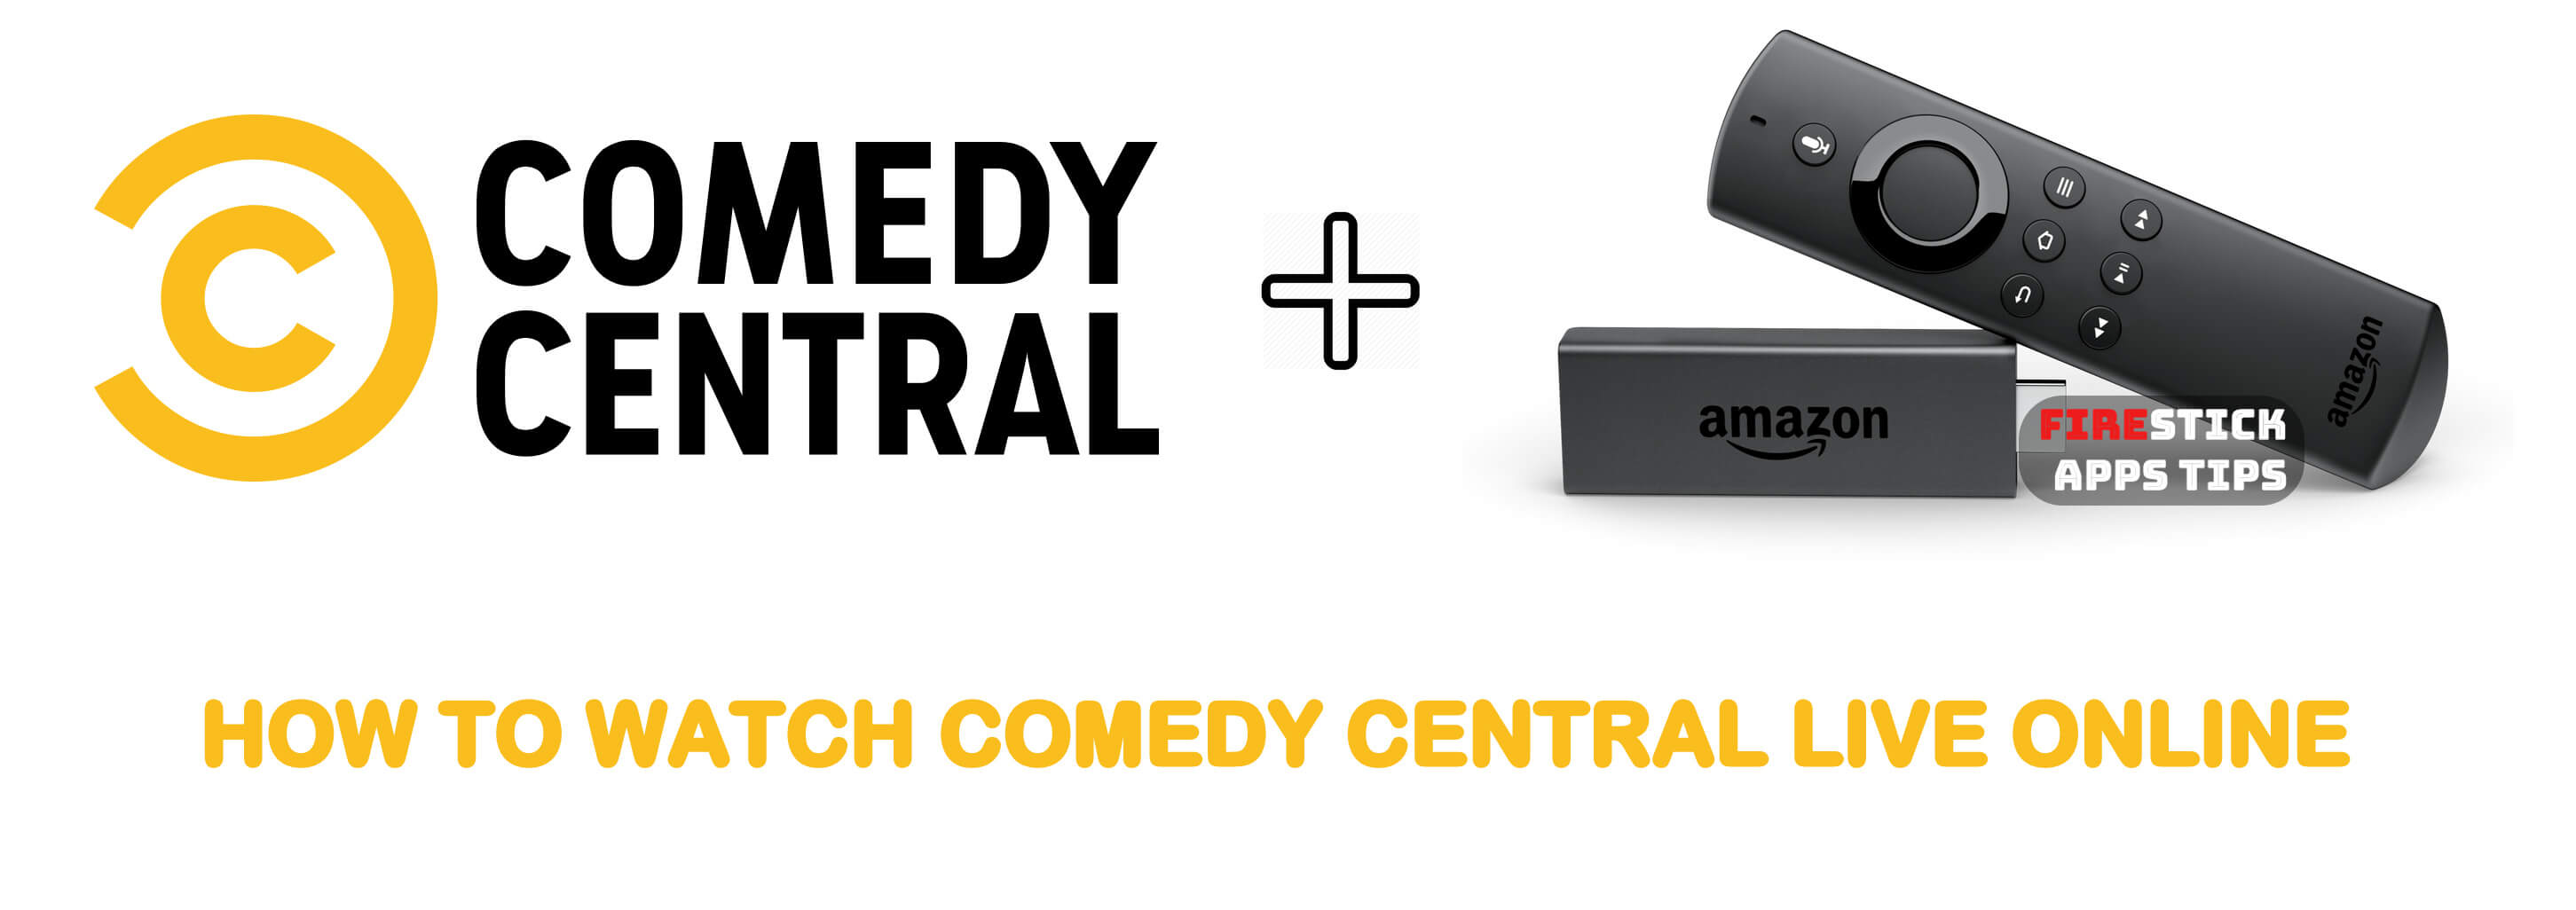 How to Get Comedy Central Live Online on Firestick